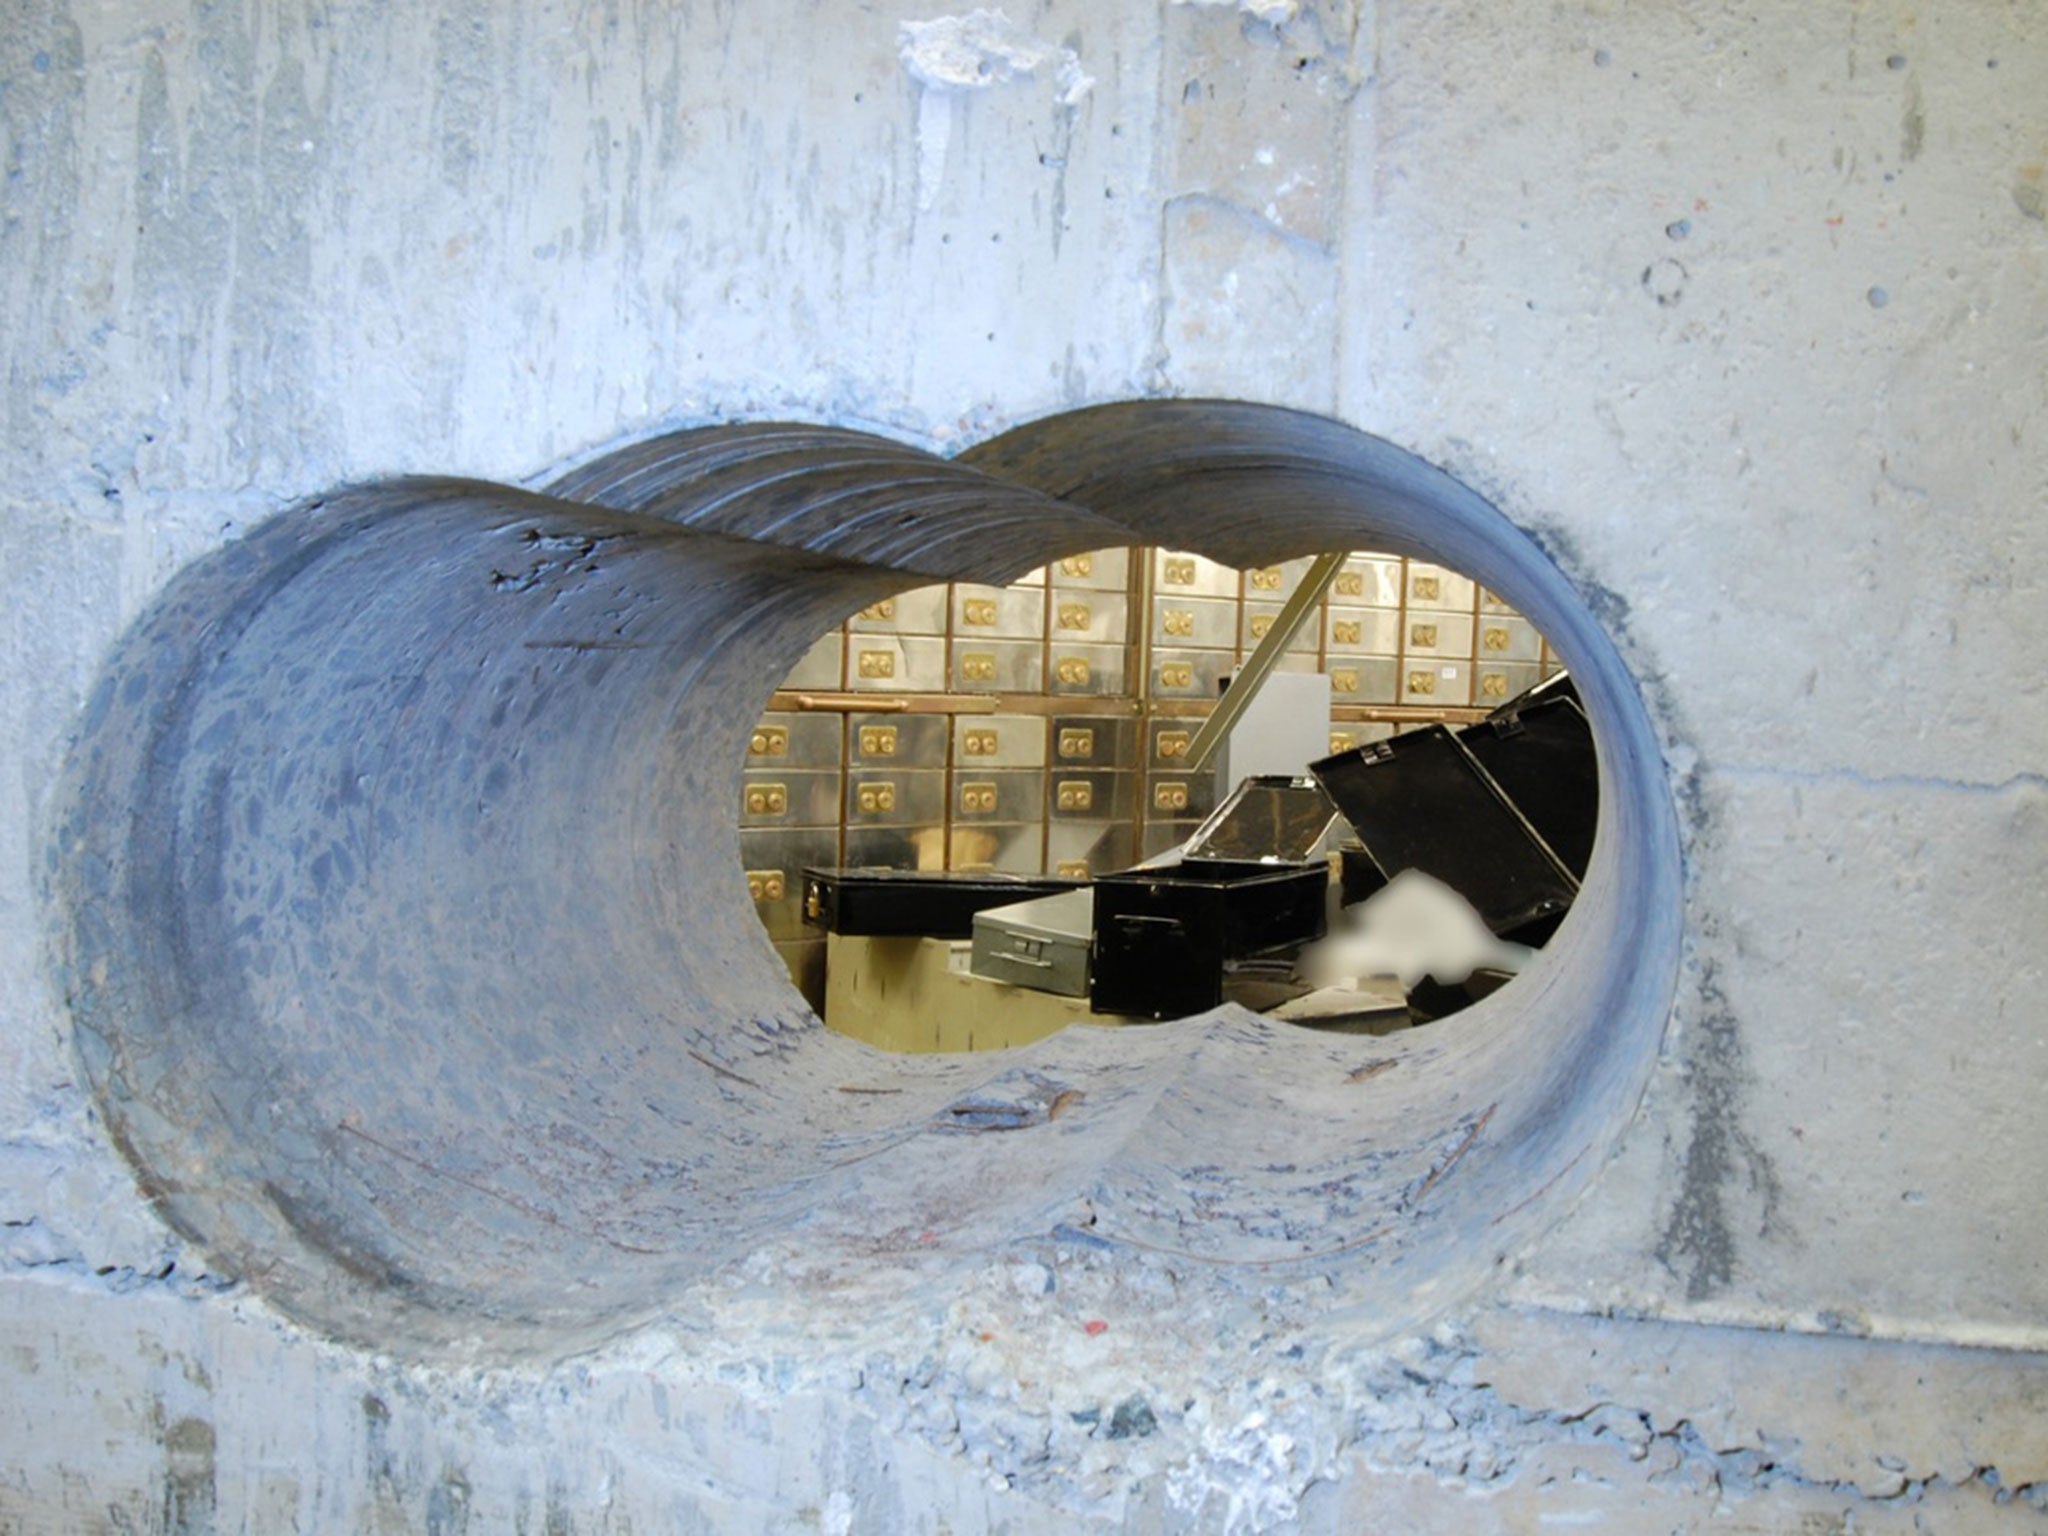 Thieves used a heavy duty drill to bore huge holes into the vault